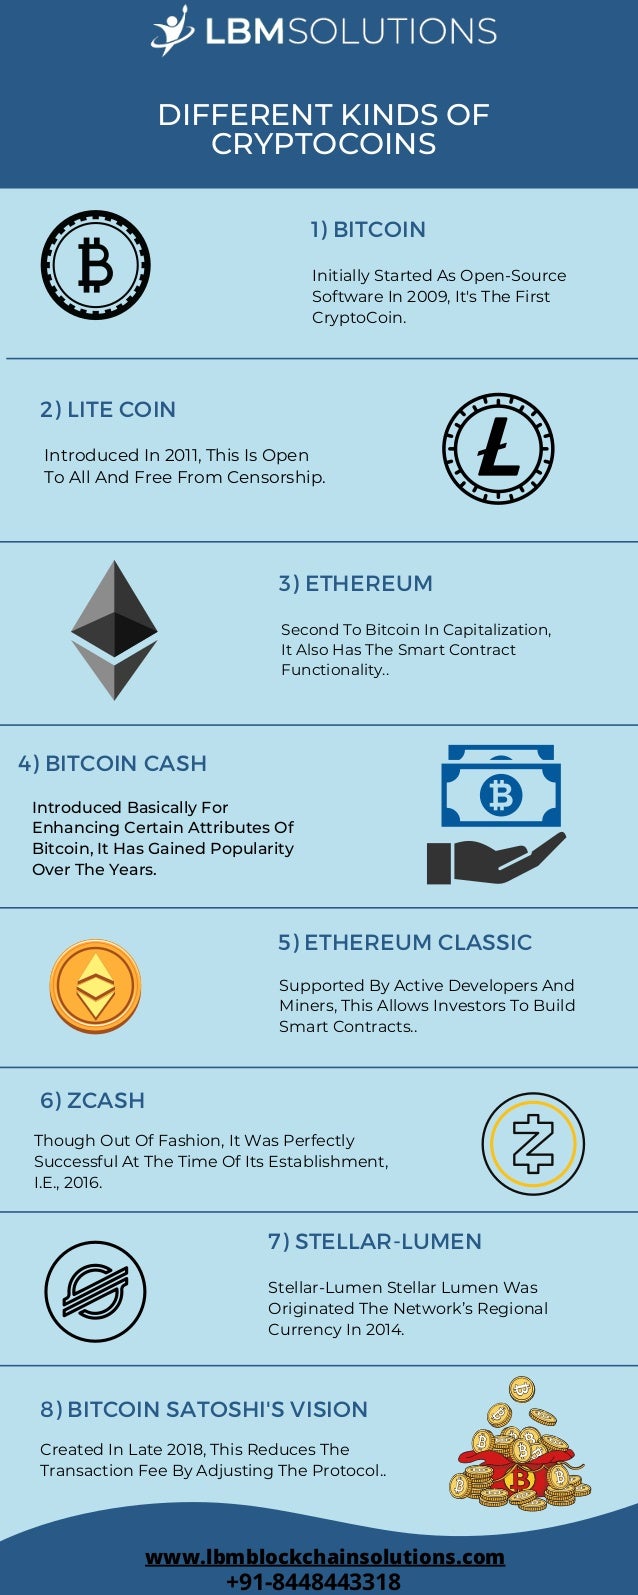 DIFFERENT KINDS OF
CRYPTOCOINS


5) ETHEREUM CLASSIC
Supported By Active Developers And

Miners, This Allows Investors To Build

Smart Contracts..
4) BITCOIN CASH
Introduced Basically For

Enhancing Certain Attributes Of

Bitcoin, It Has Gained Popularity

Over The Years.
3) ETHEREUM
Second To Bitcoin In Capitalization,

It Also Has The Smart Contract

Functionality..
2) LITE COIN
Introduced In 2011, This Is Open

To All And Free From Censorship.
1) BITCOIN
Initially Started As Open-Source

Software In 2009, It's The First

CryptoCoin.
6) ZCASH
Though Out Of Fashion, It Was Perfectly

Successful At The Time Of Its Establishment,

I.E., 2016.
7) STELLAR-LUMEN
Stellar-Lumen Stellar Lumen Was

Originated The Network’s Regional

Currency In 2014.
8) BITCOIN SATOSHI'S VISION
Created In Late 2018, This Reduces The

Transaction Fee By Adjusting The Protocol..
www.lbmblockchainsolutions.com


+91-8448443318
 